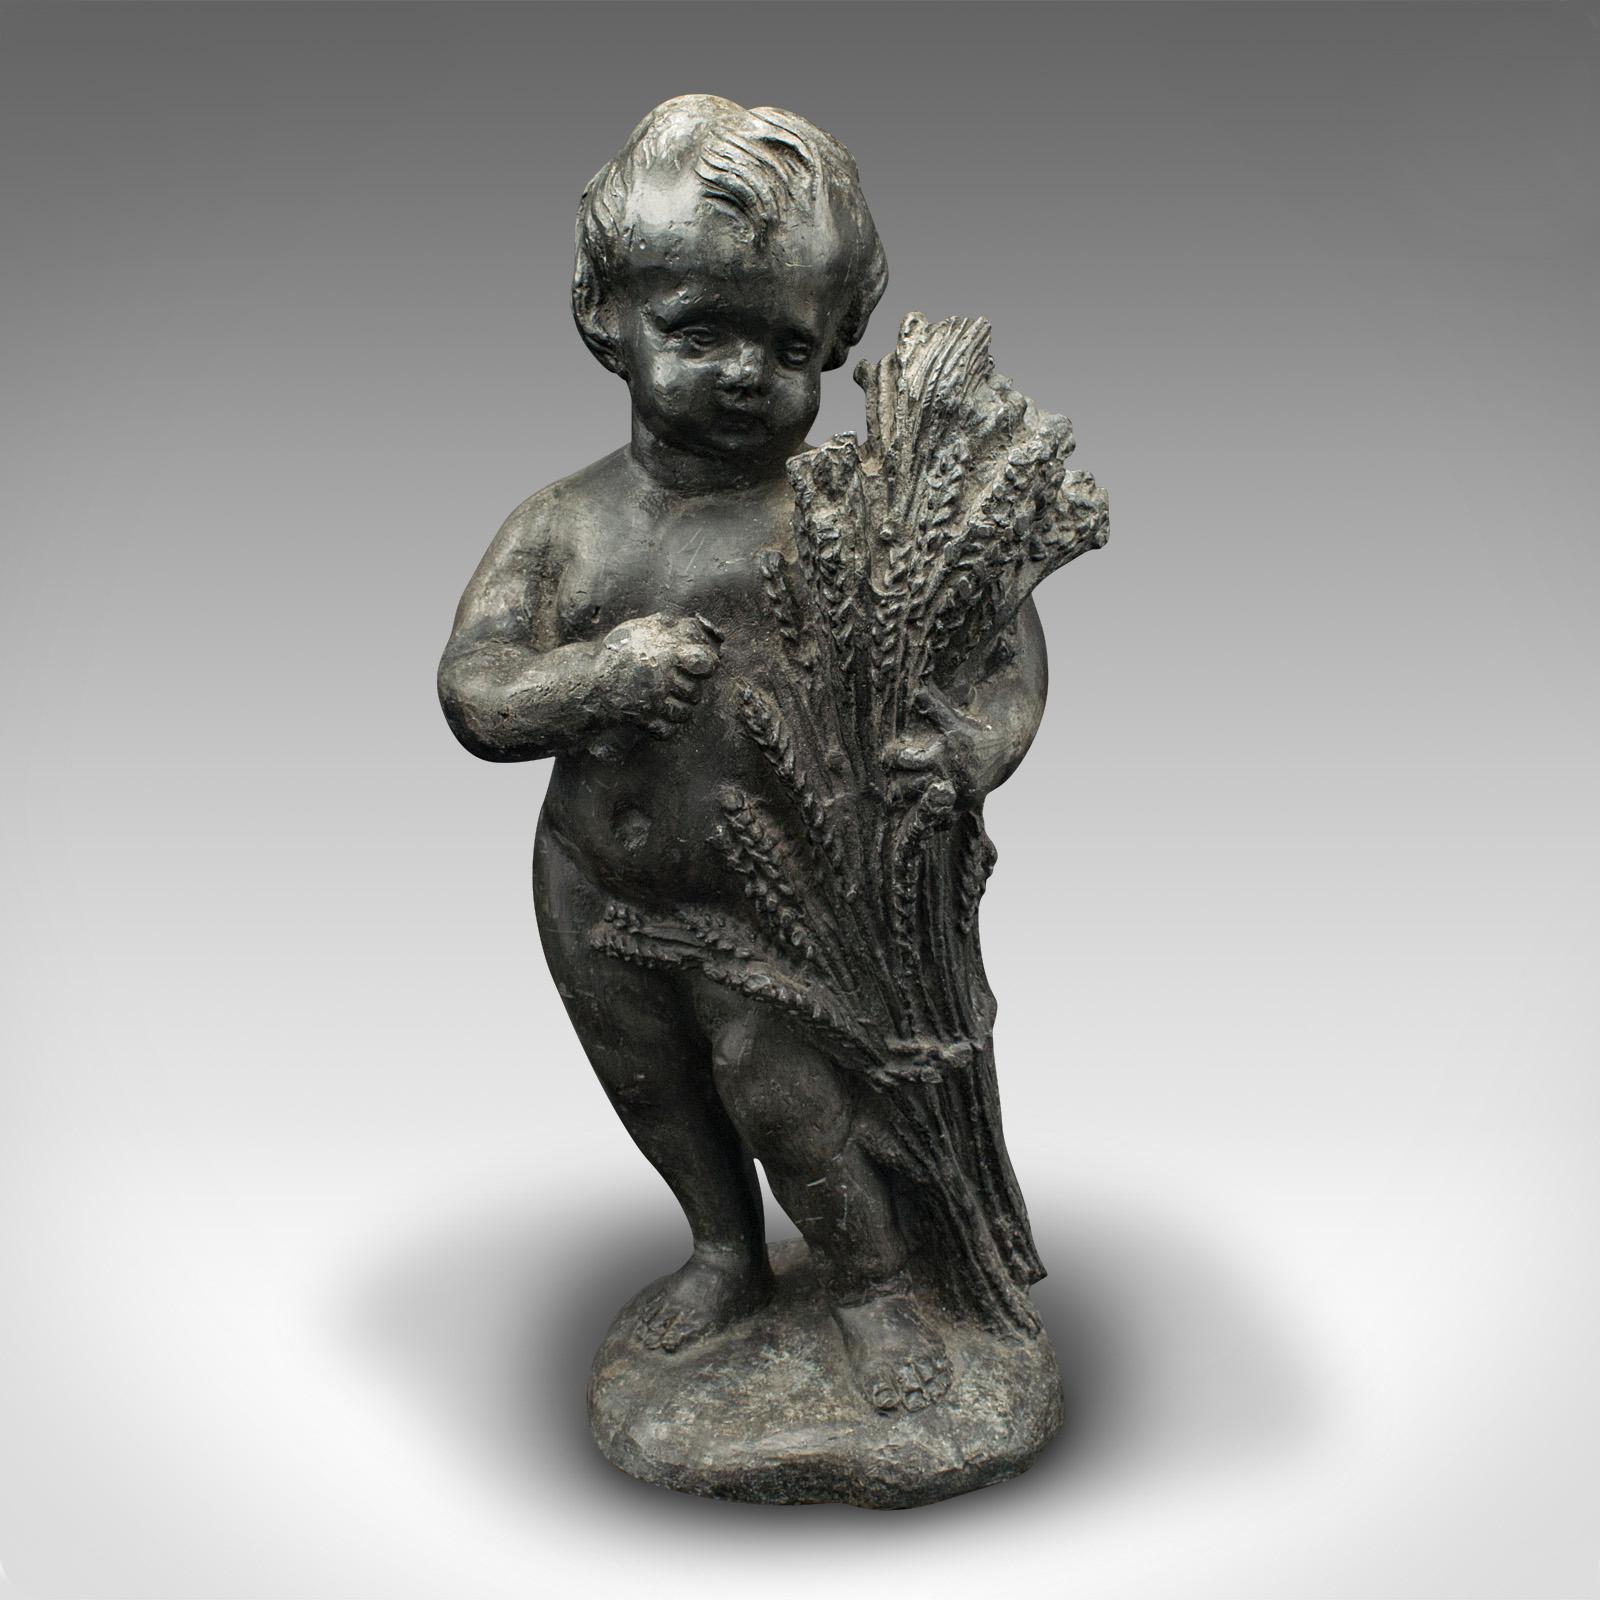 This is a heavy antique putto figure. An Italian, lead cherub statue in Neoclassical taste, dating to the early Victorian period, circa 1850.

Wonderfully substantial statue with fine decorative interest
Displays a desirable aged patina and in good